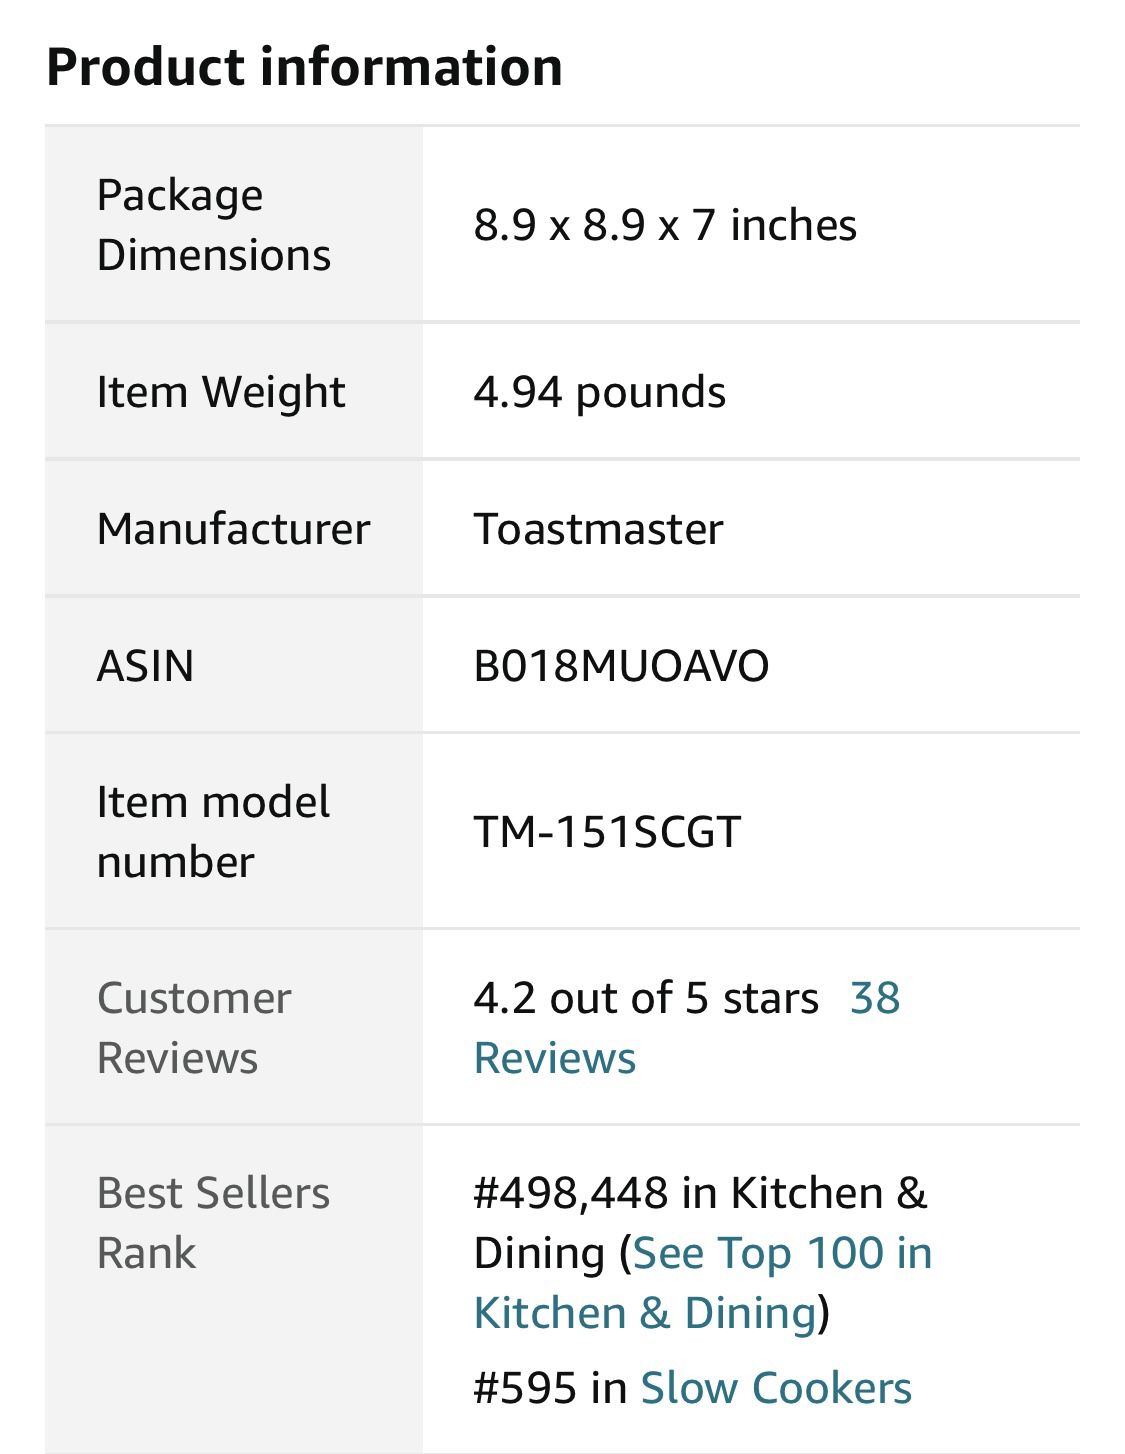 Toastmaster, 1.5 Quart, Slow Cooker. for Sale in Bellmore, NY - OfferUp